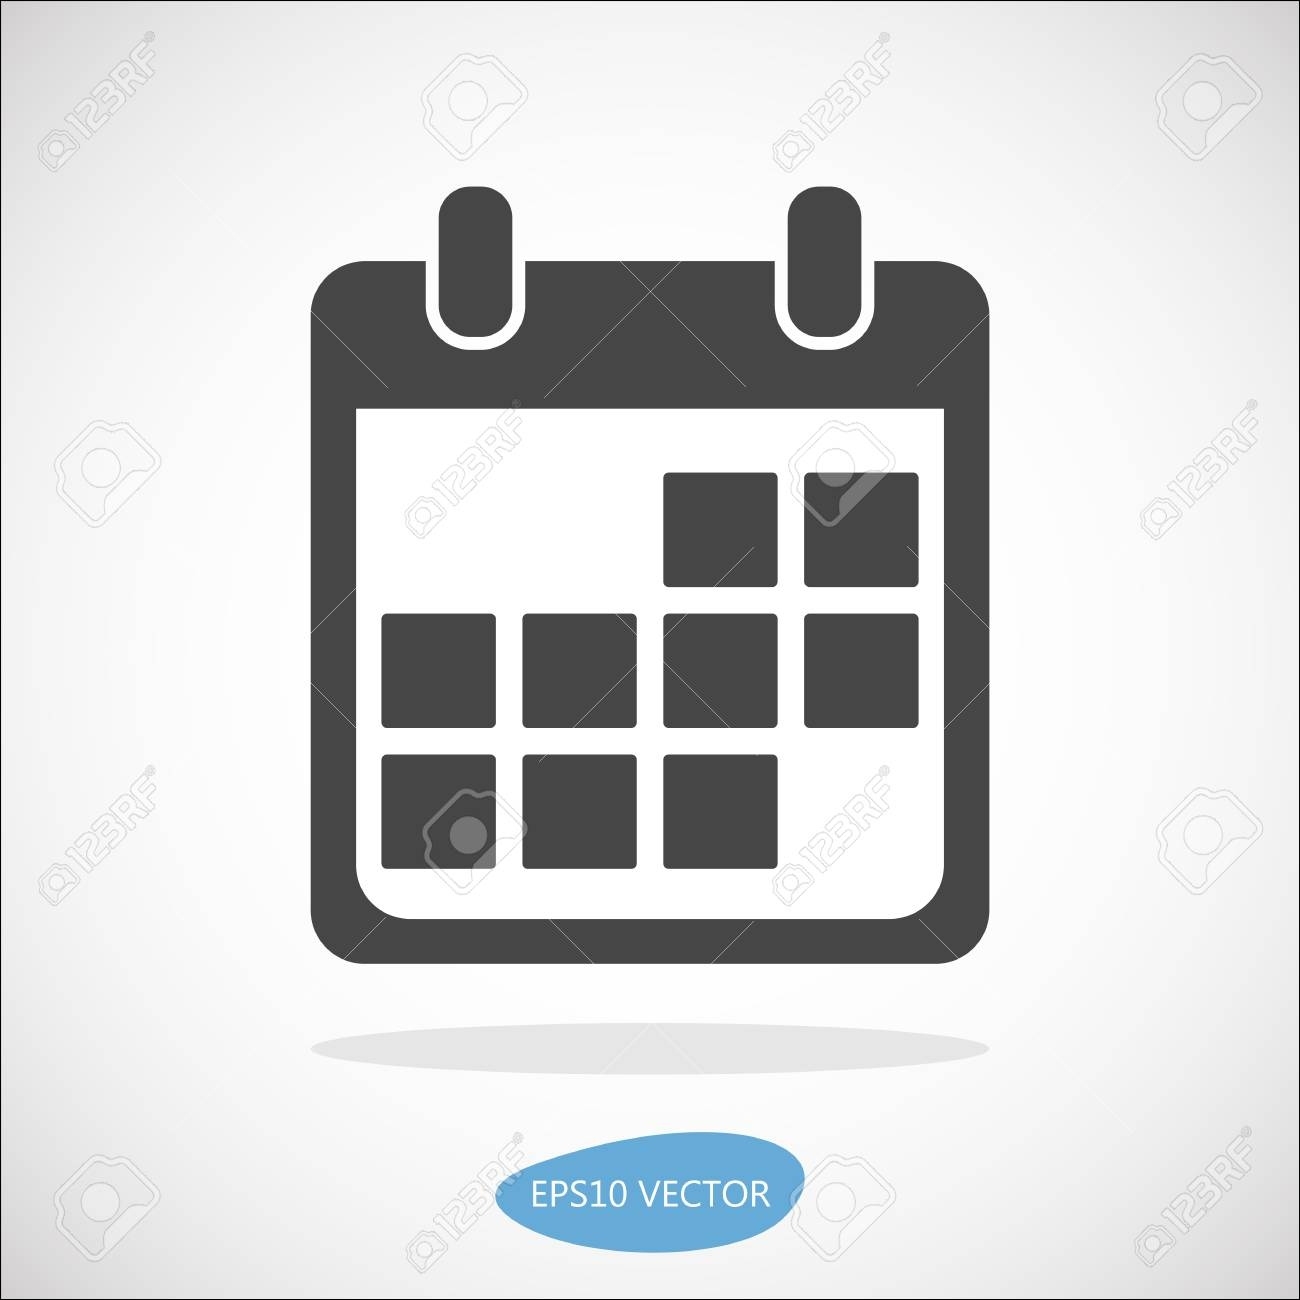 Calendar Event Icon, Vector Illustration. Simplyfied Flat Material Calendar Icon Material Design